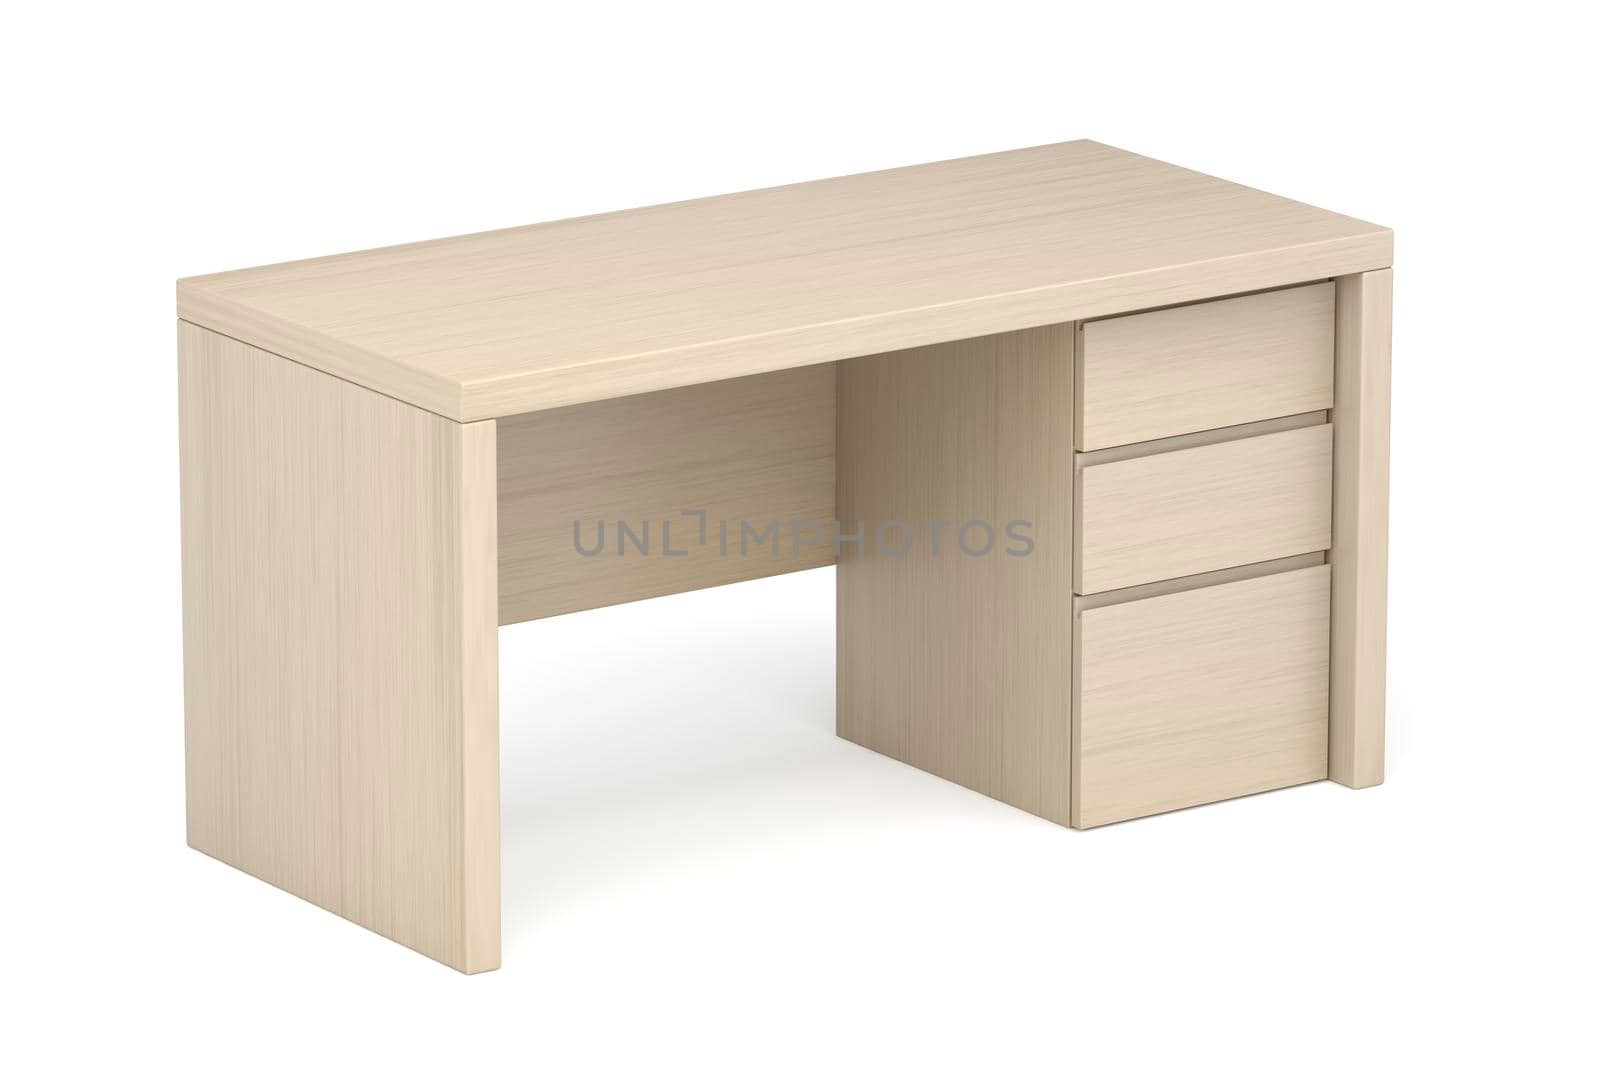 Wooden desk with drawers on white background